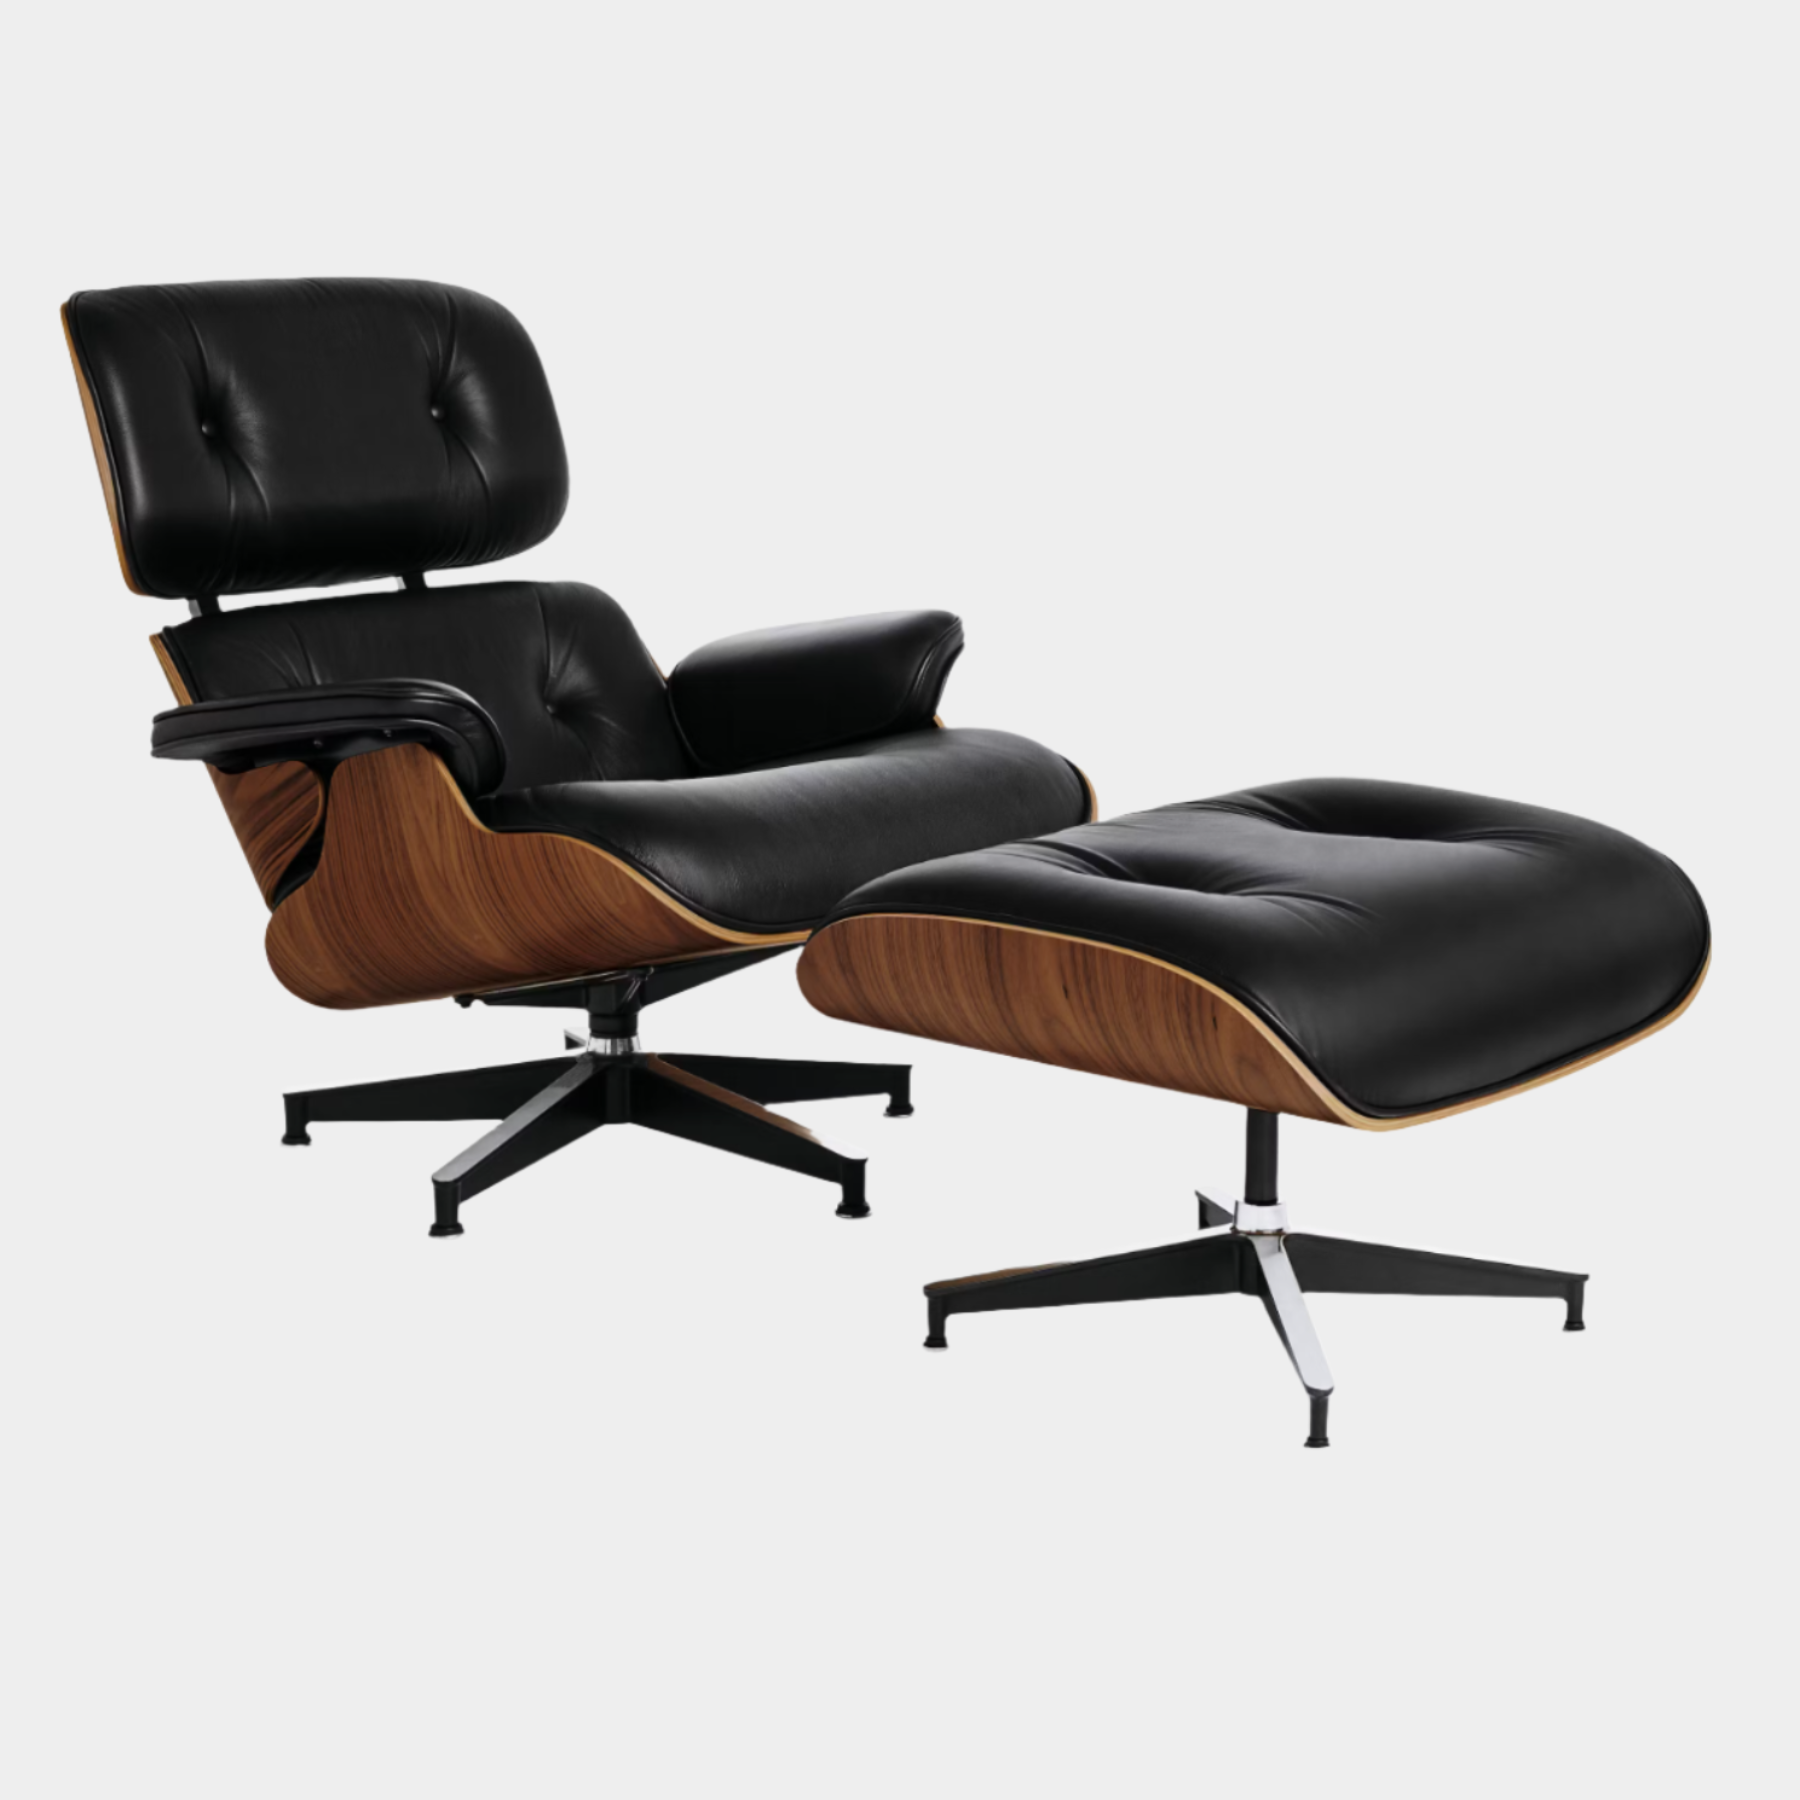 Eames Lounge Chair And Ottoman - Tall Version